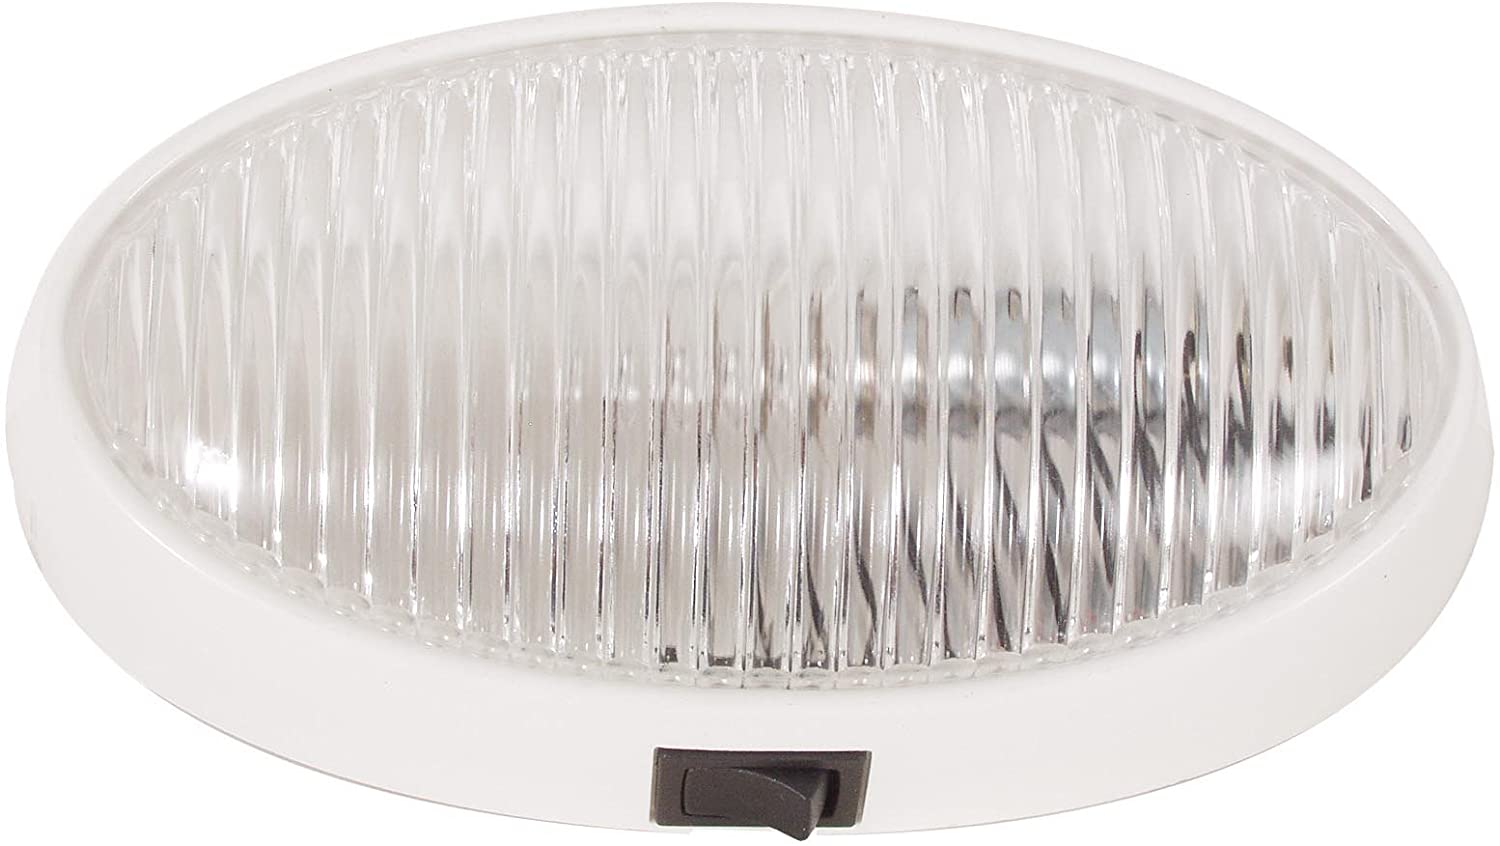 Optronics RVPL7CP Oval Porch Utility Lights with Switch, White